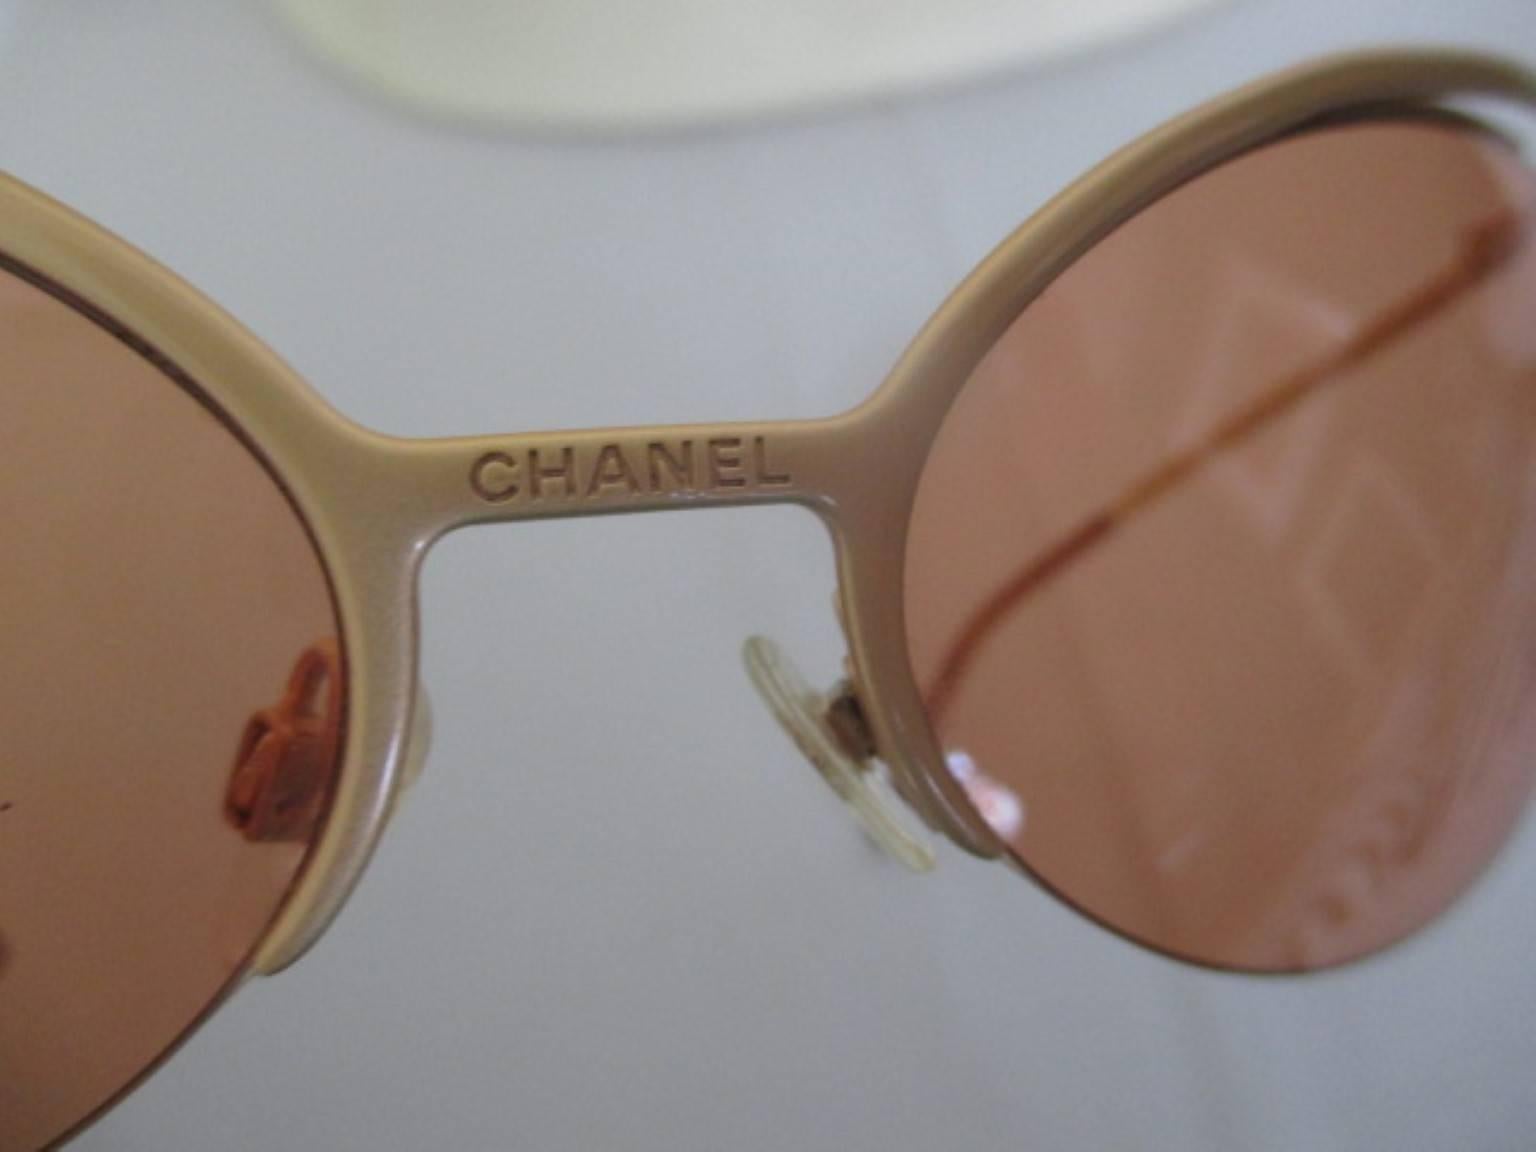 These super-stylized matte gold frame sunglasses have rimless oval orange color lenses and is very light to wear.
CC gold metal logos on the bottom of the arms, Chanel engraved on the nose bridge and lenses
Its in excellent vintage condition with a